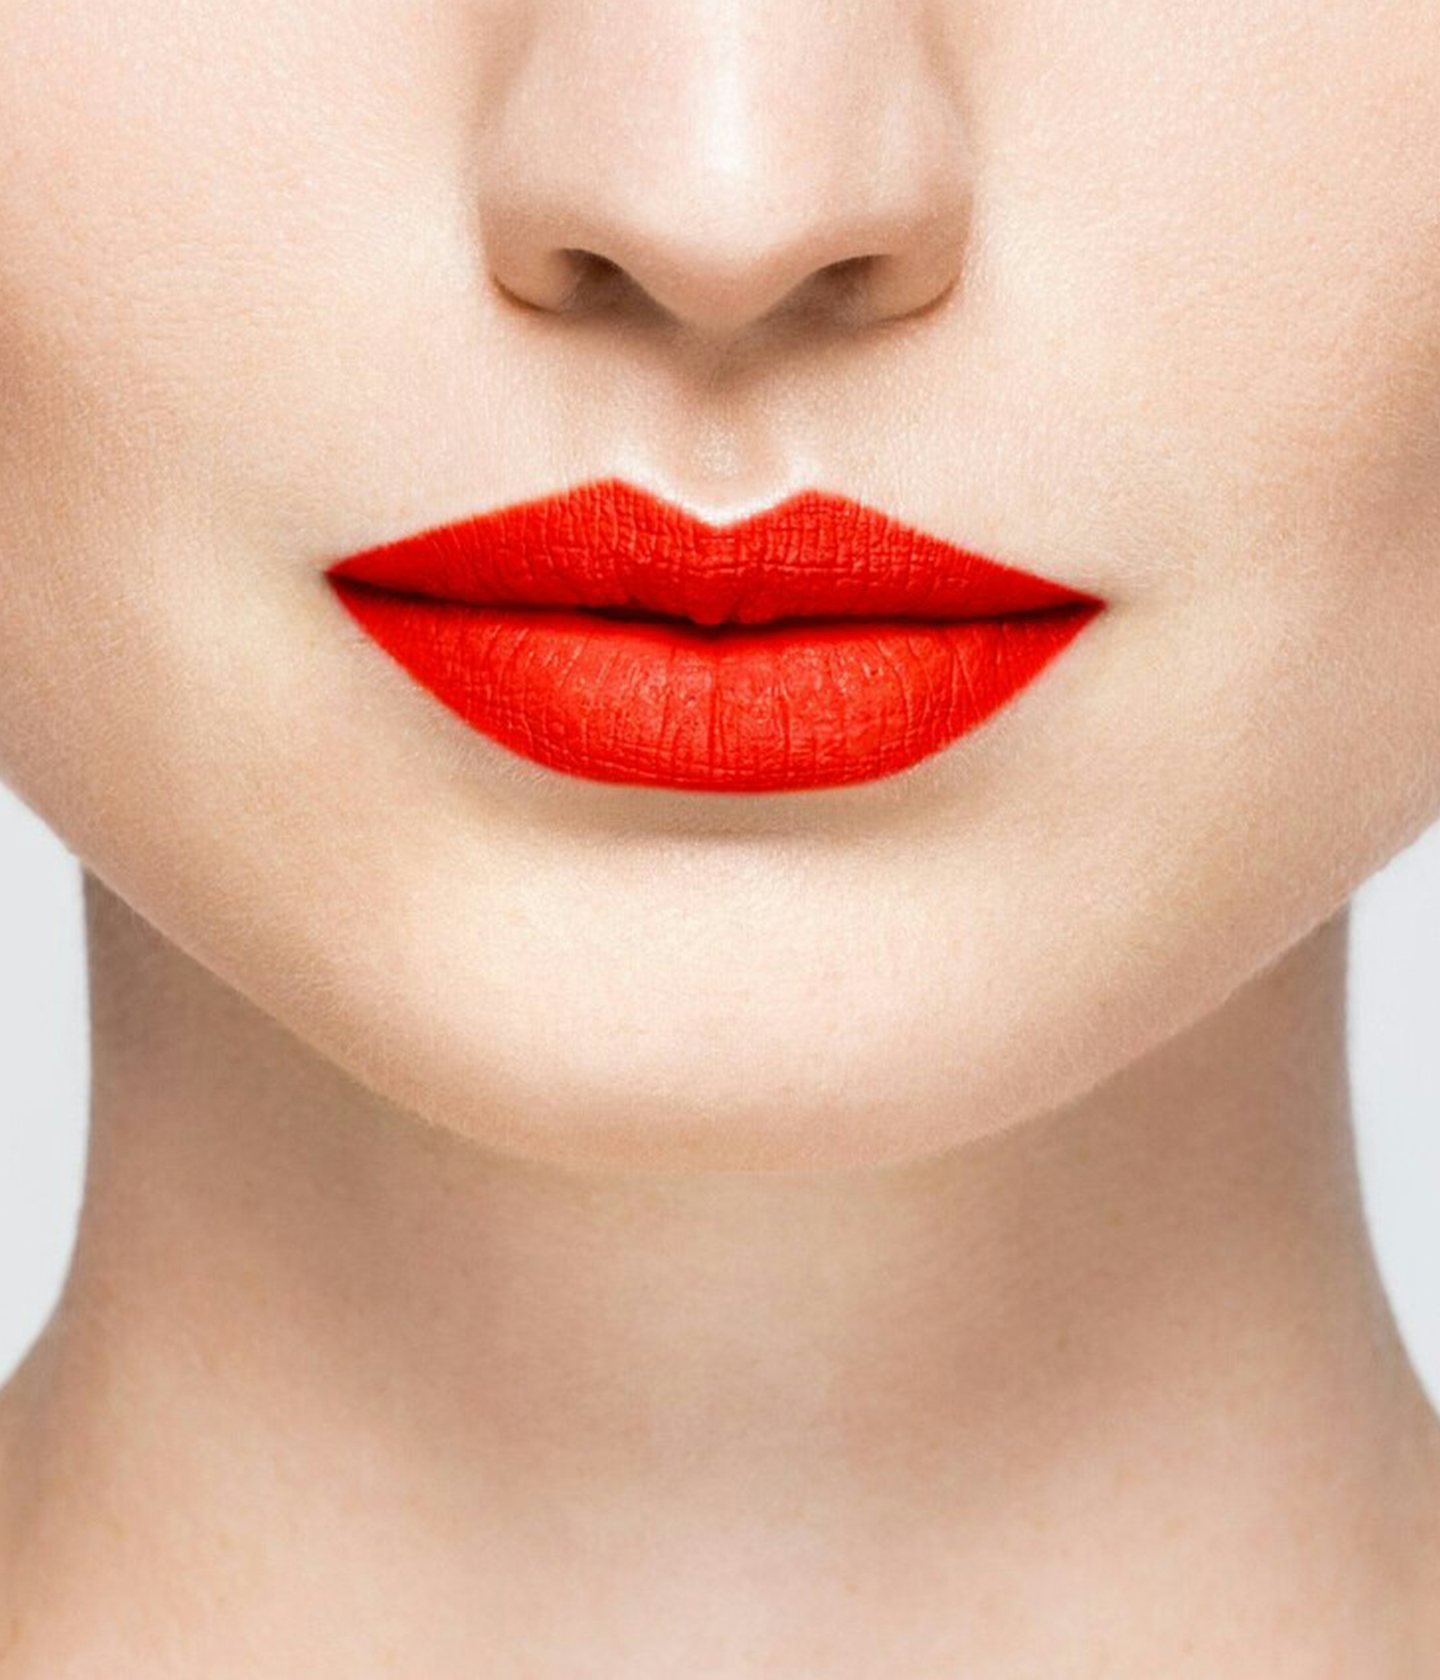 La bouche rouge Le Rouge Chloë lipstick shade on the lips of a fair skin model